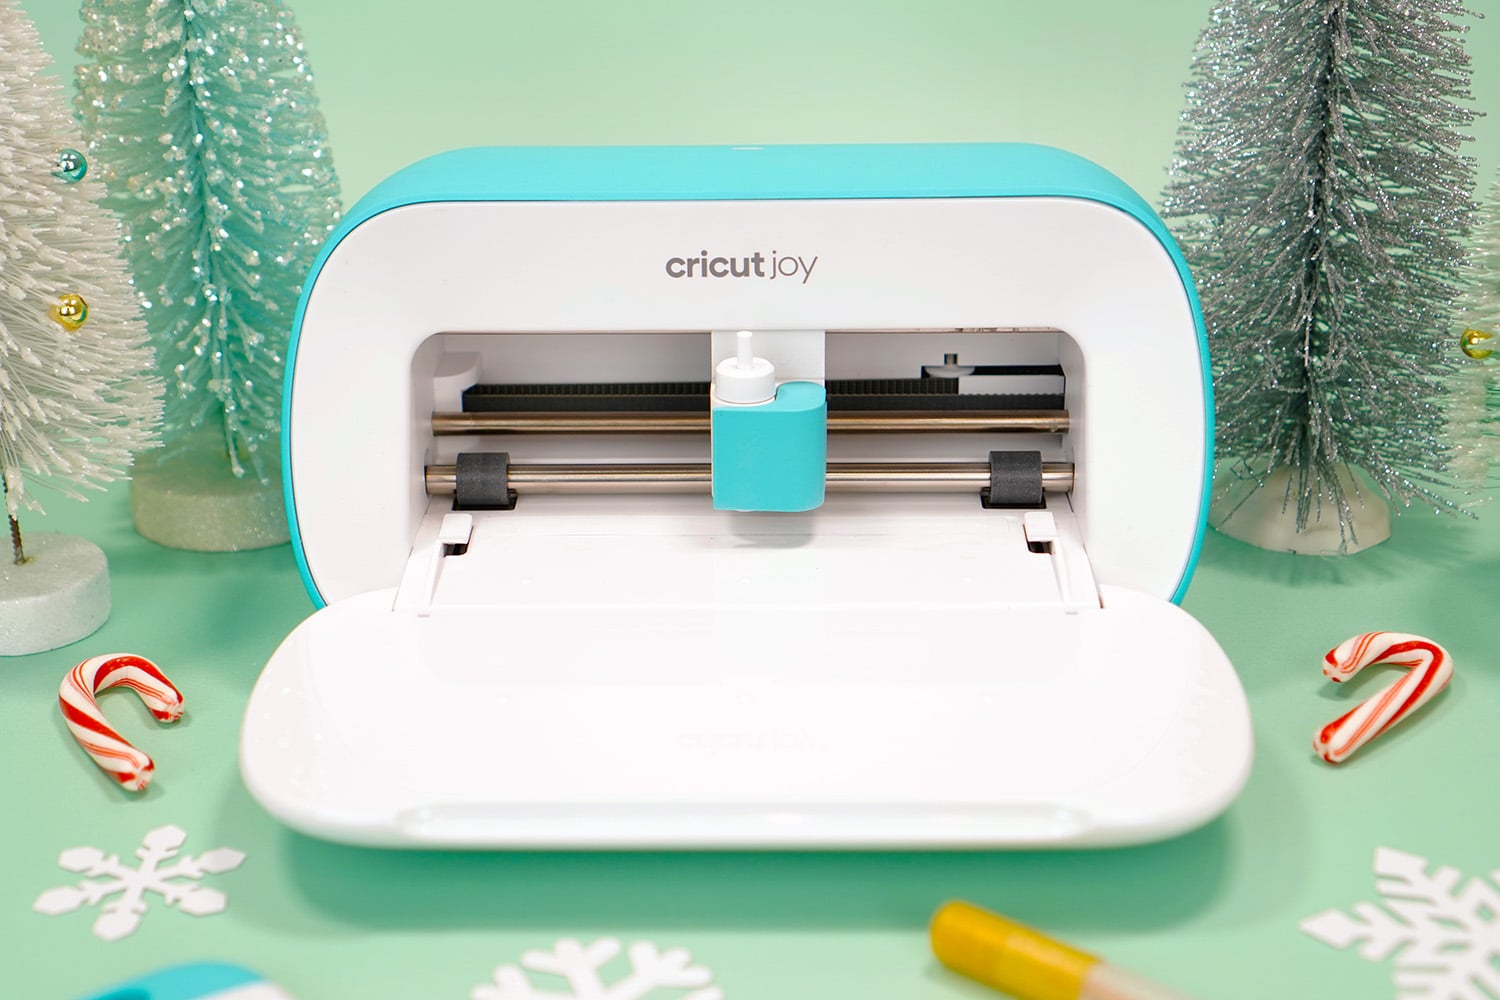 Cricut Joy machine with bottle brush trees, paper snowflakes, and candy canes on mint green background